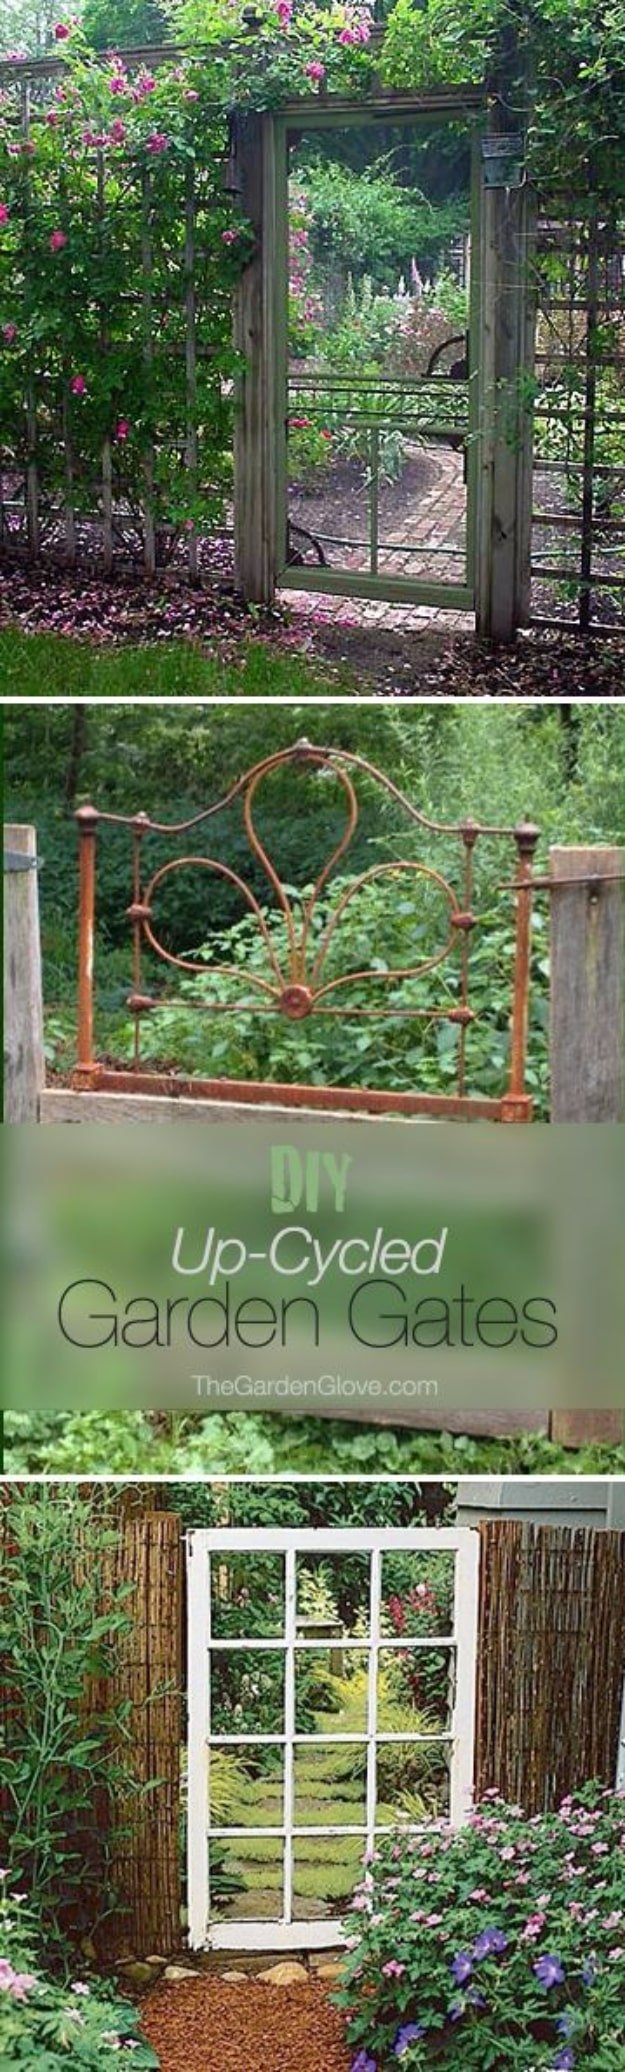 DIY Fences and Gates - DIY Up-Cycled Garden Gates - How To Make Easy Fence and Gate Project for Backyard and Home - Step by Step Tutorial and Ideas for Painting, Updating and Making Fences and DIY Gate - Cool Outdoors and Yard Projects 